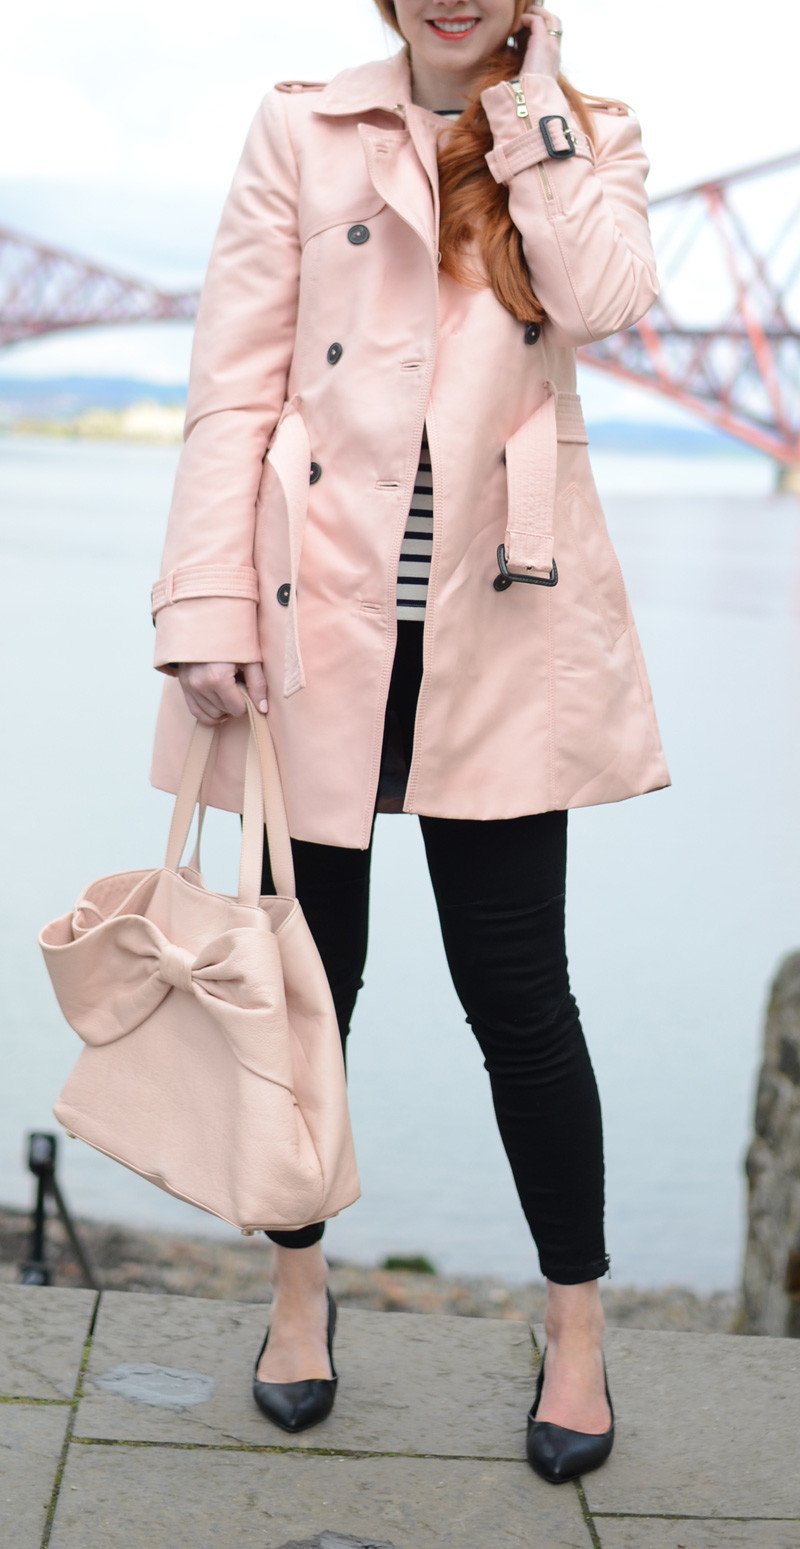 pink and black spring outfit: pink trench coat and black capri pants